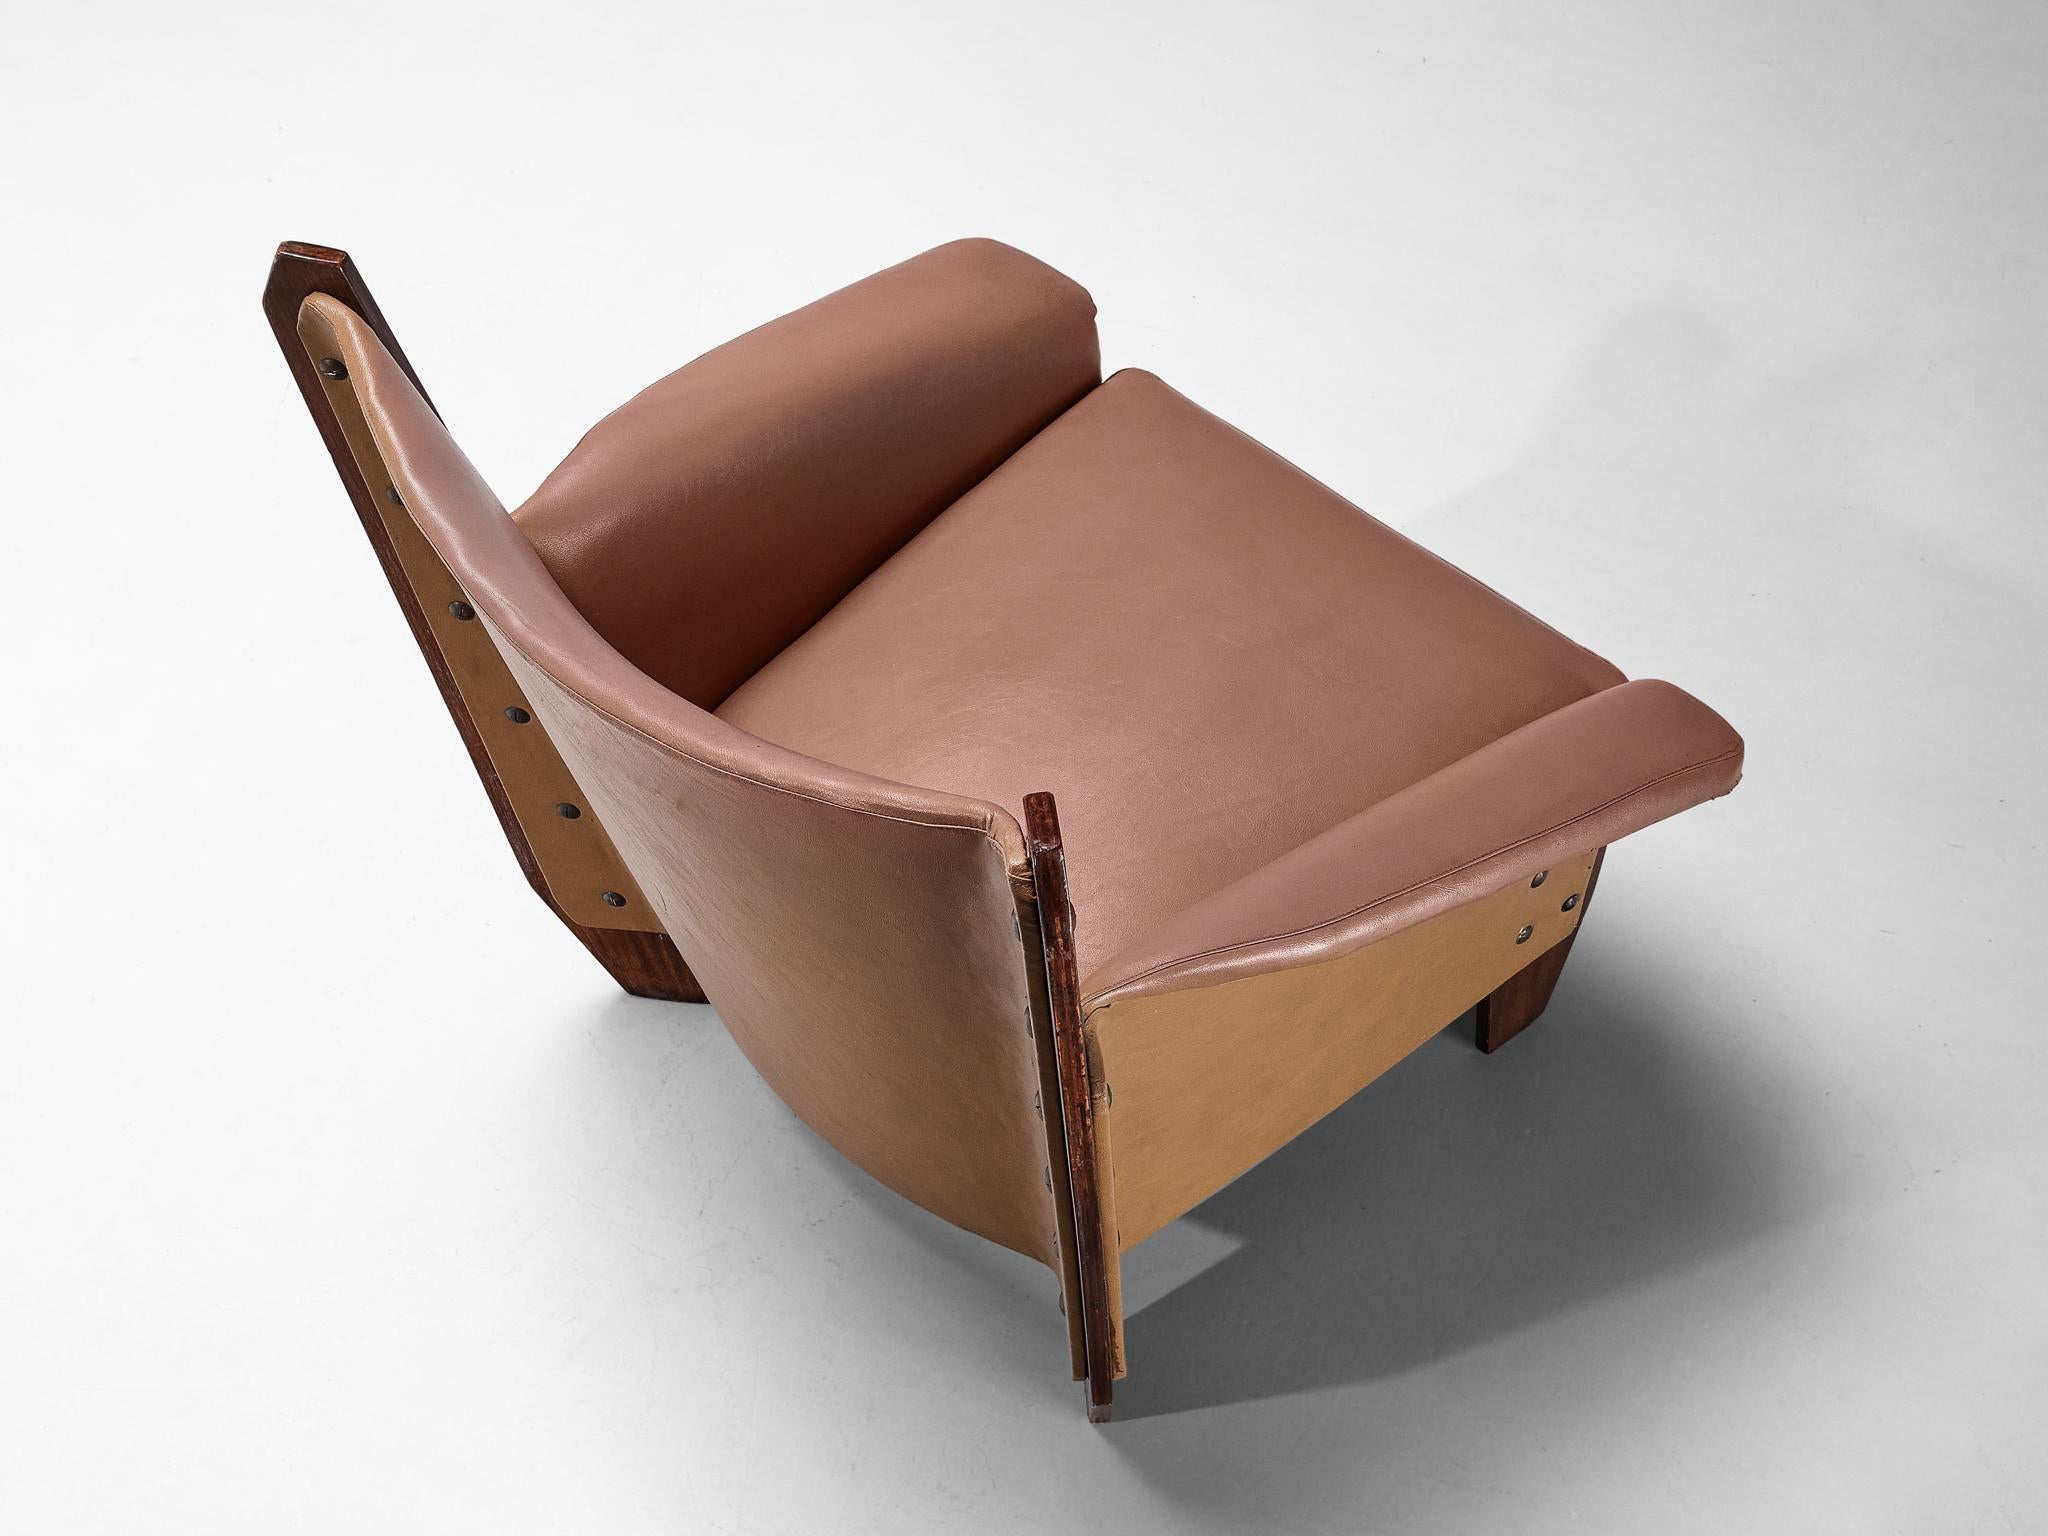 Distinct Pair of Italian Lounge Chairs in Plywood and Camel Pink Upholstery